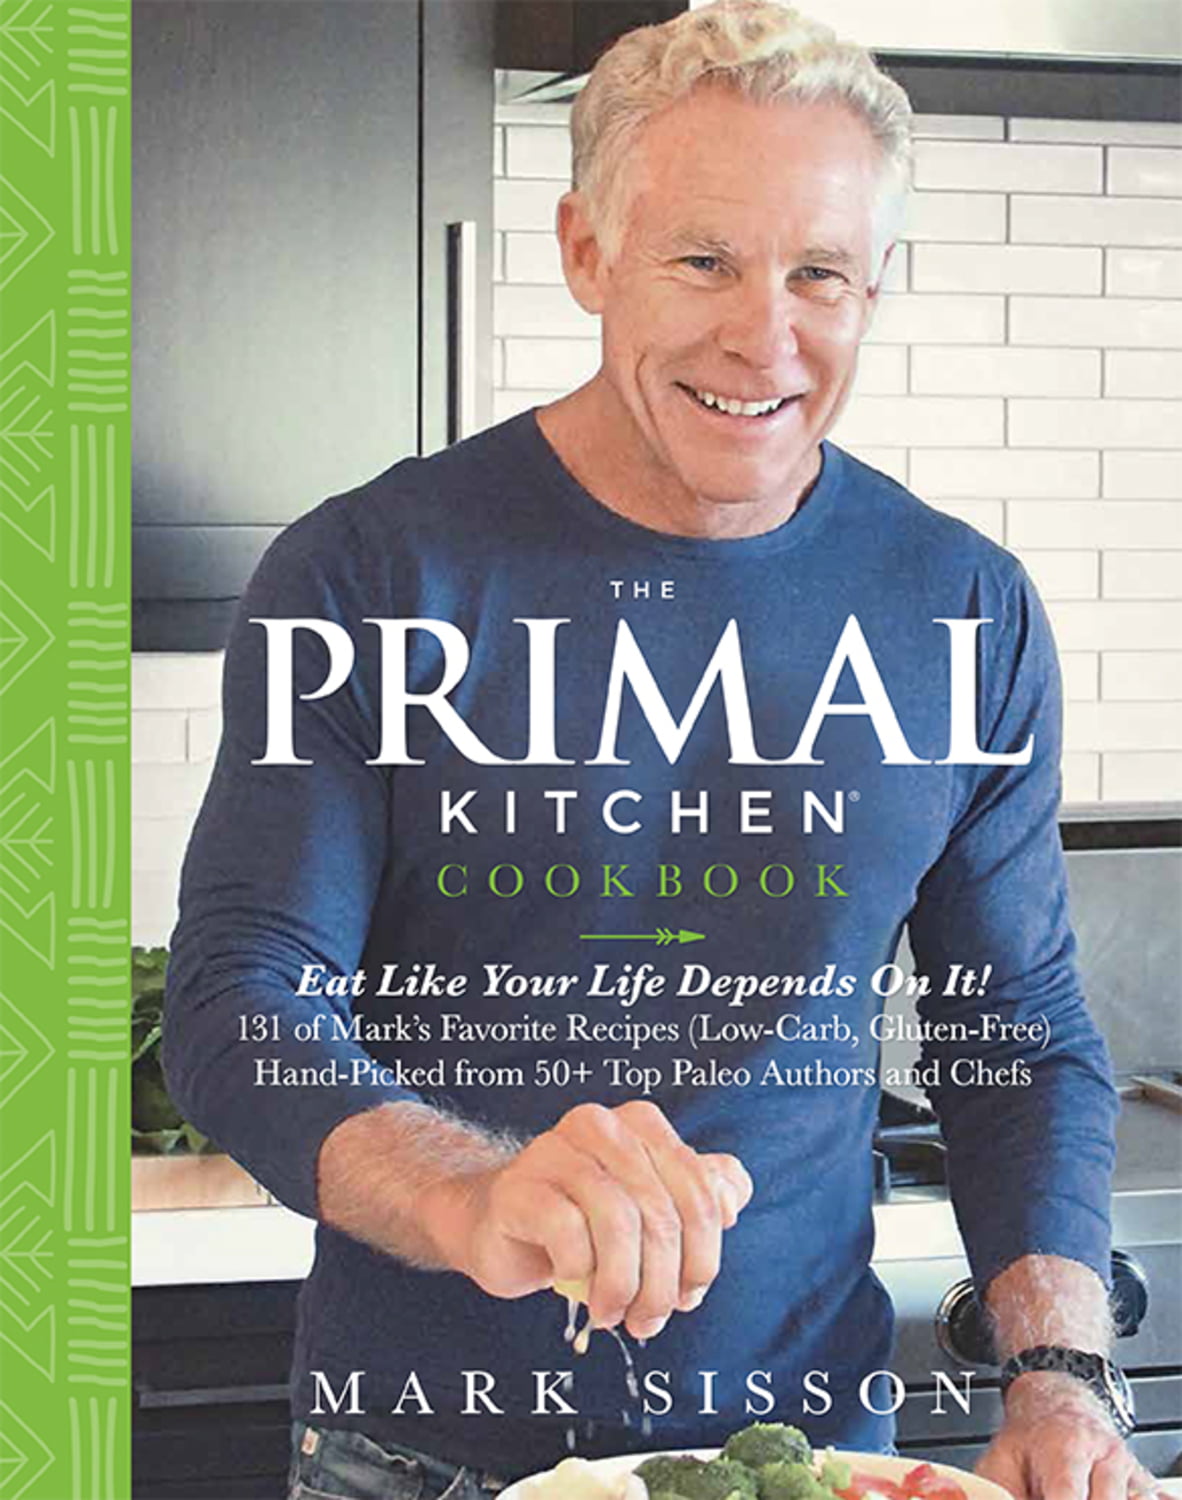 The Primal Kitchen Cookbook : Eat Like Your Life Depends On It! (Hardcover)